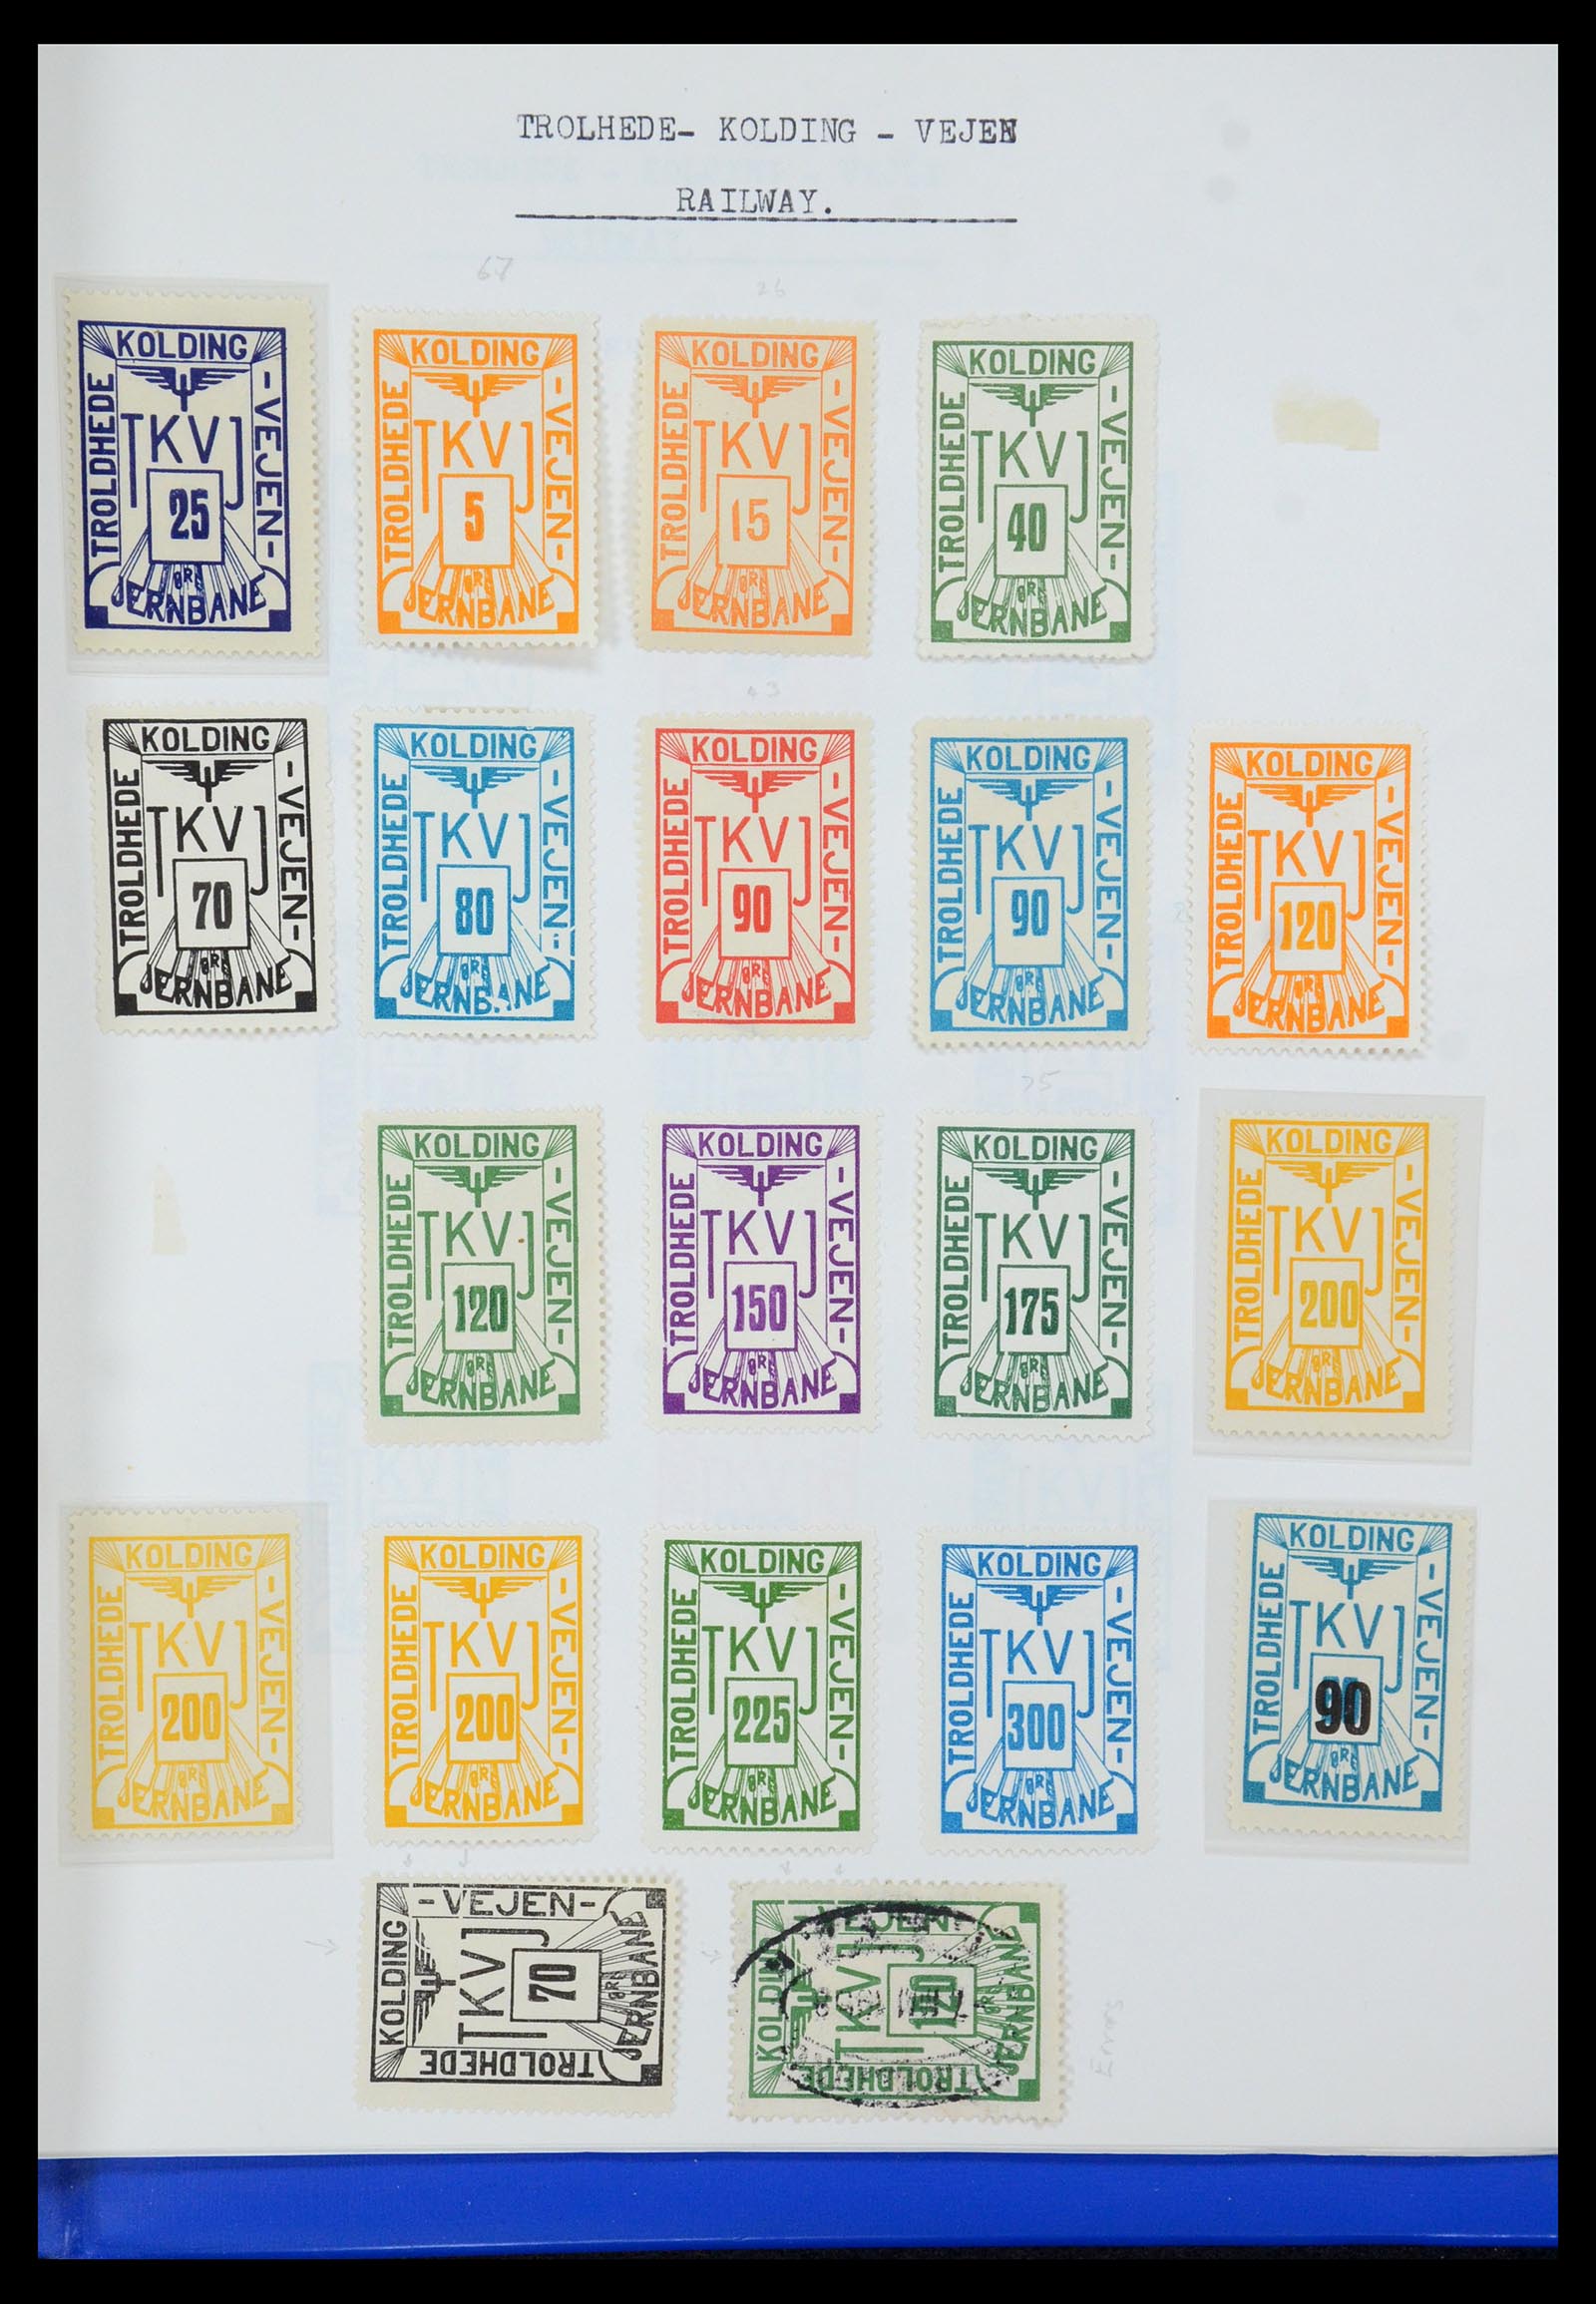 35650 099 - Stamp Collection 35650 Denmark railroad stamps.